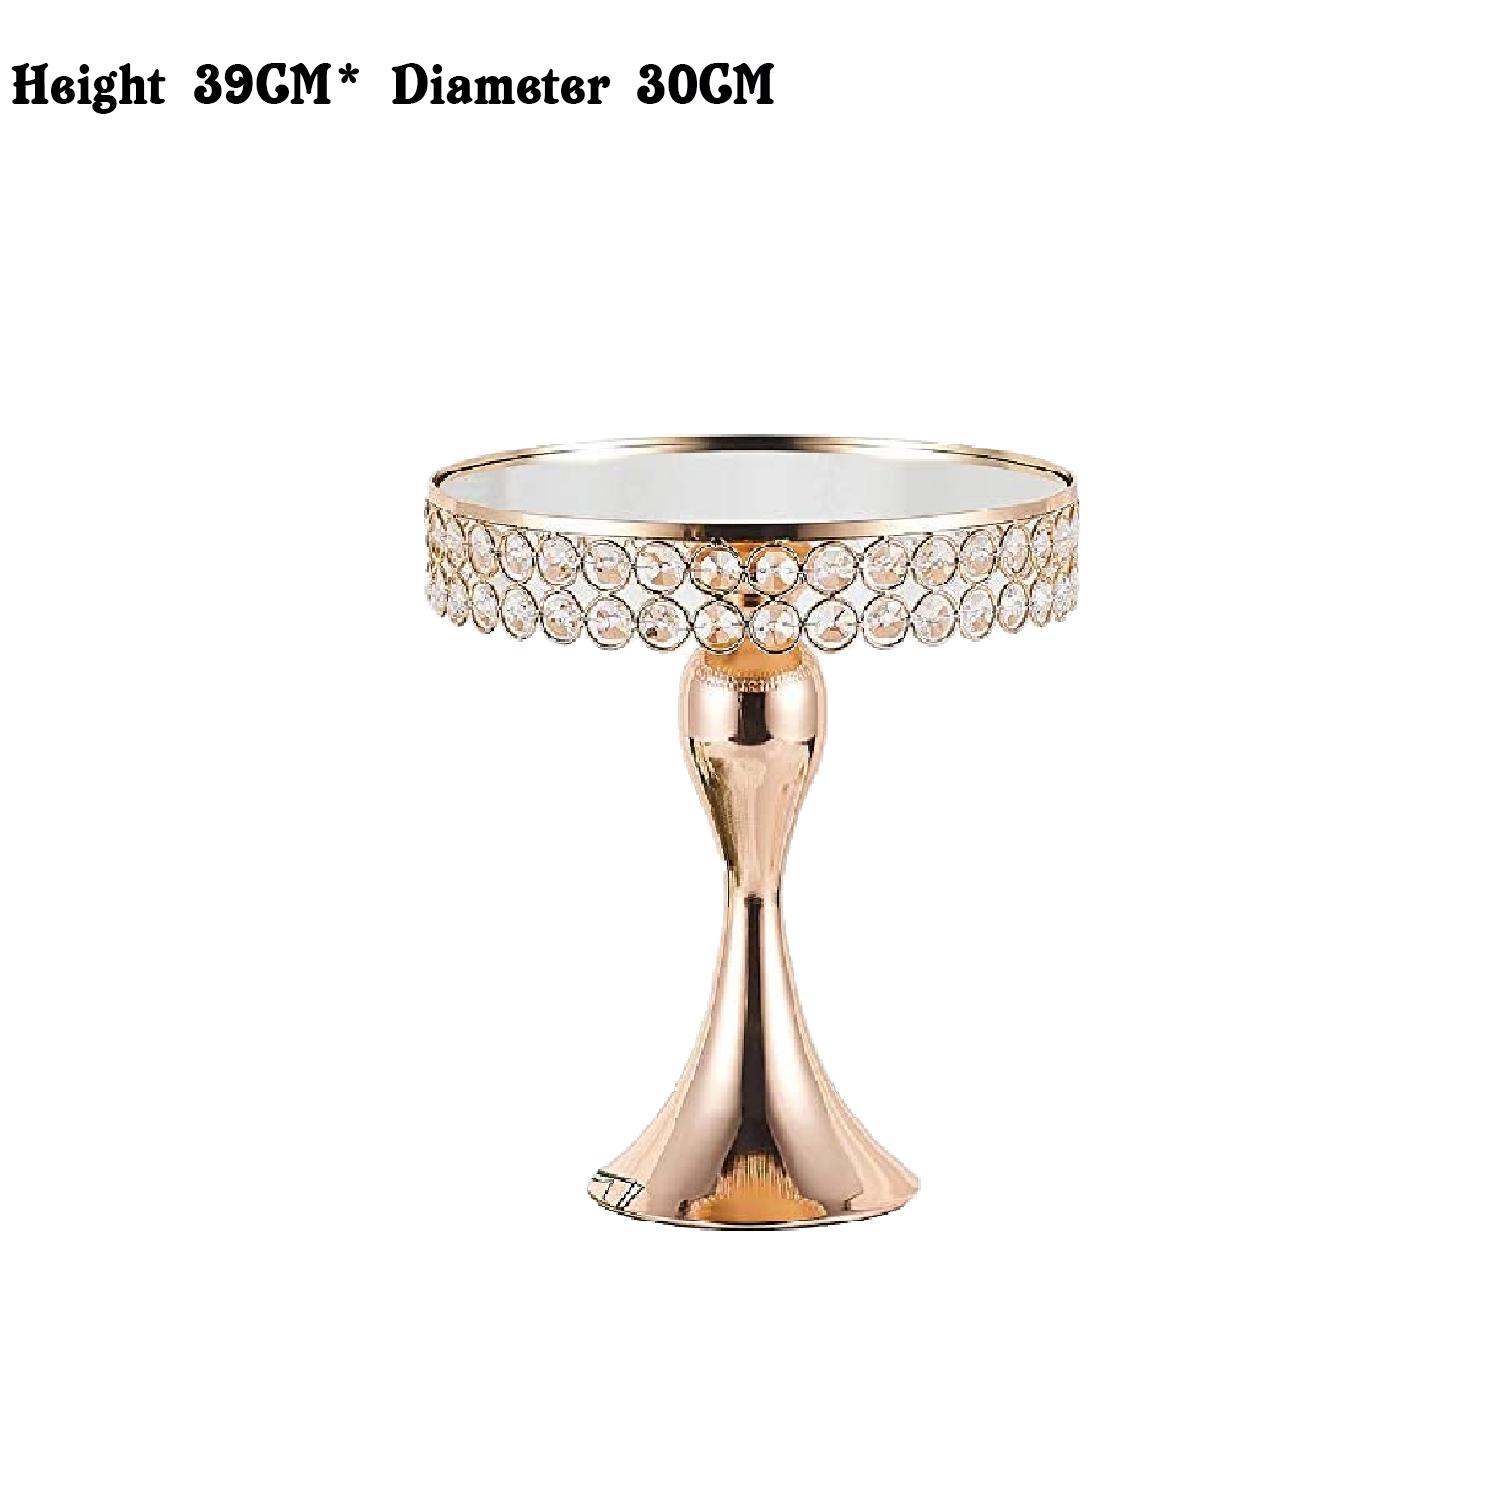 GOLD CRYSTAL CAKE STAND 1PC H 39CM* D 30CM